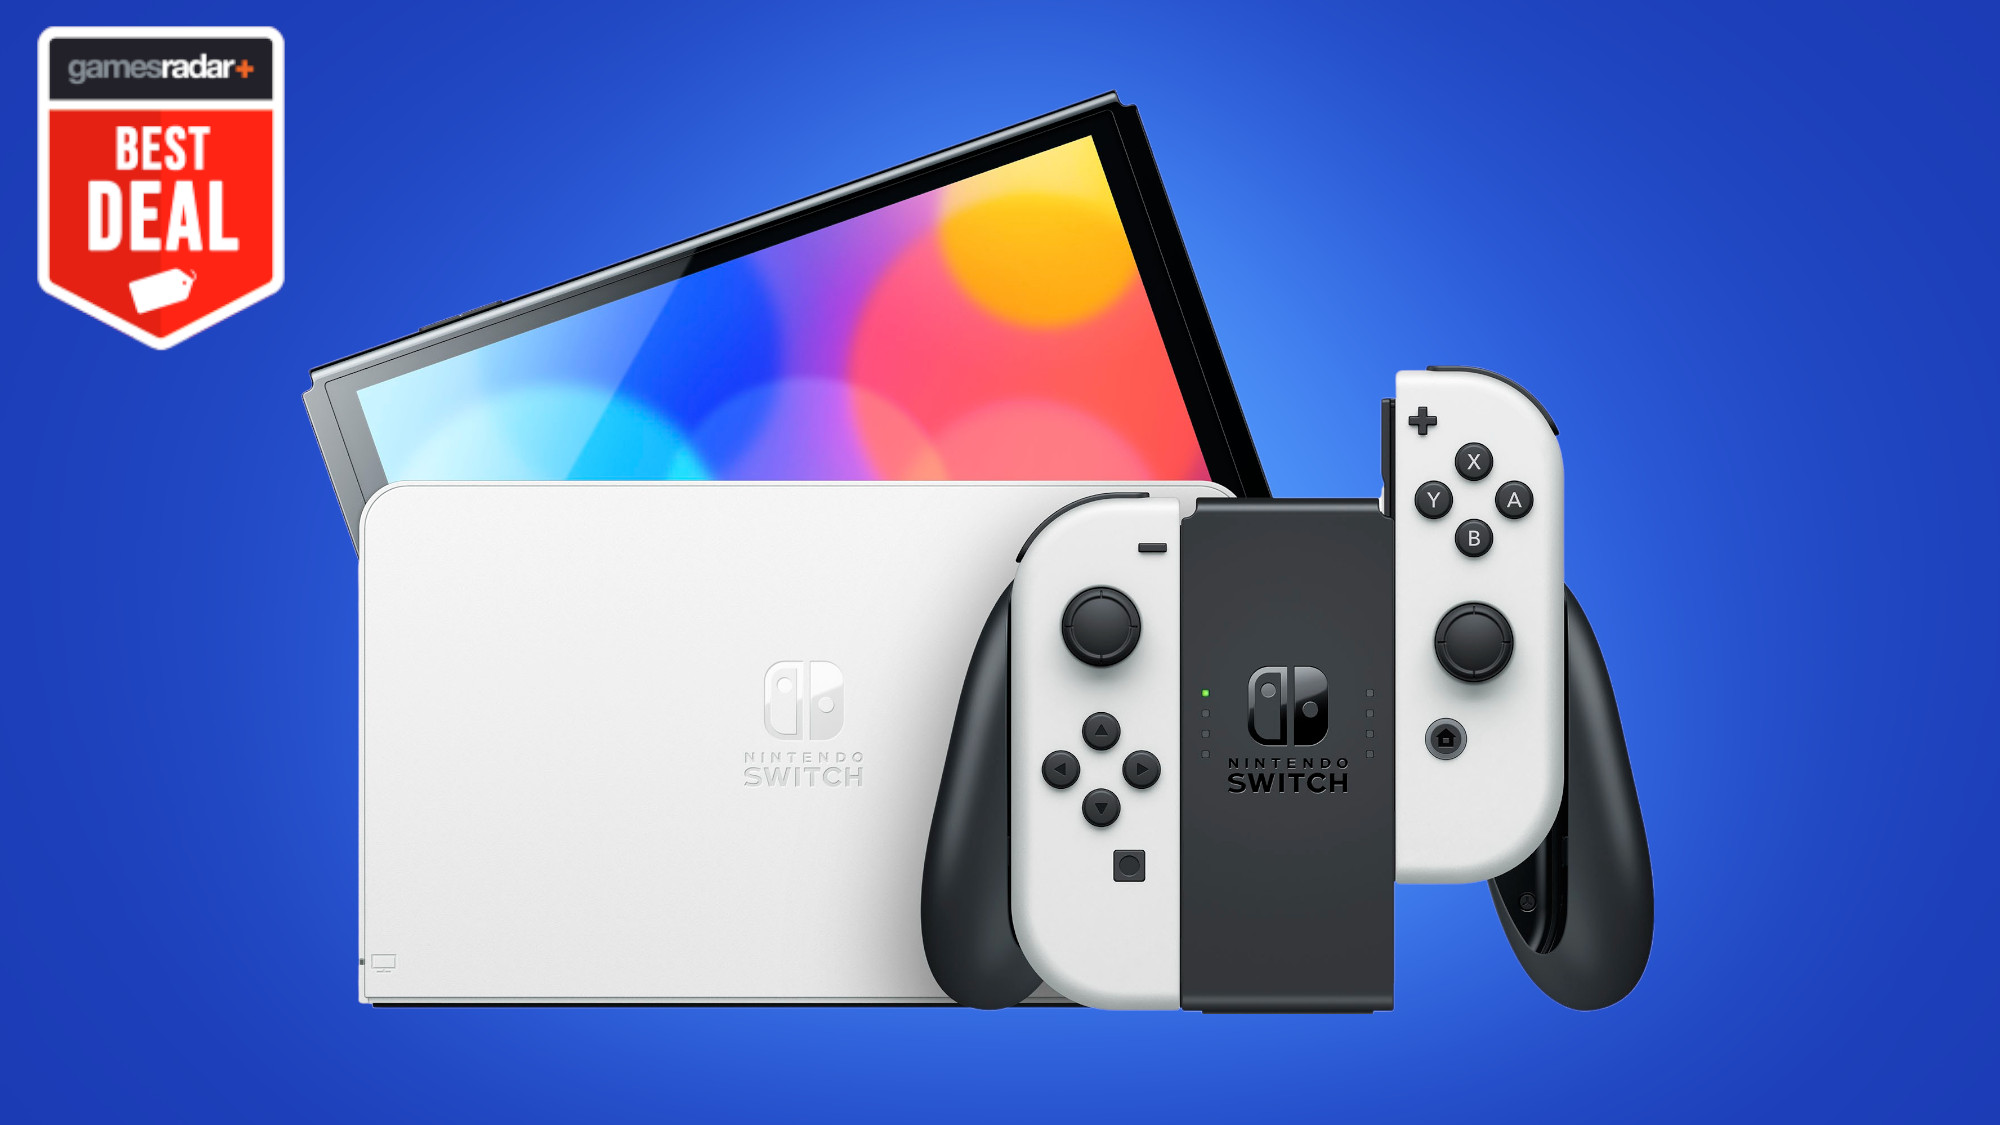 Nintendo Switch deals just slashed the OLED model to a new record low price